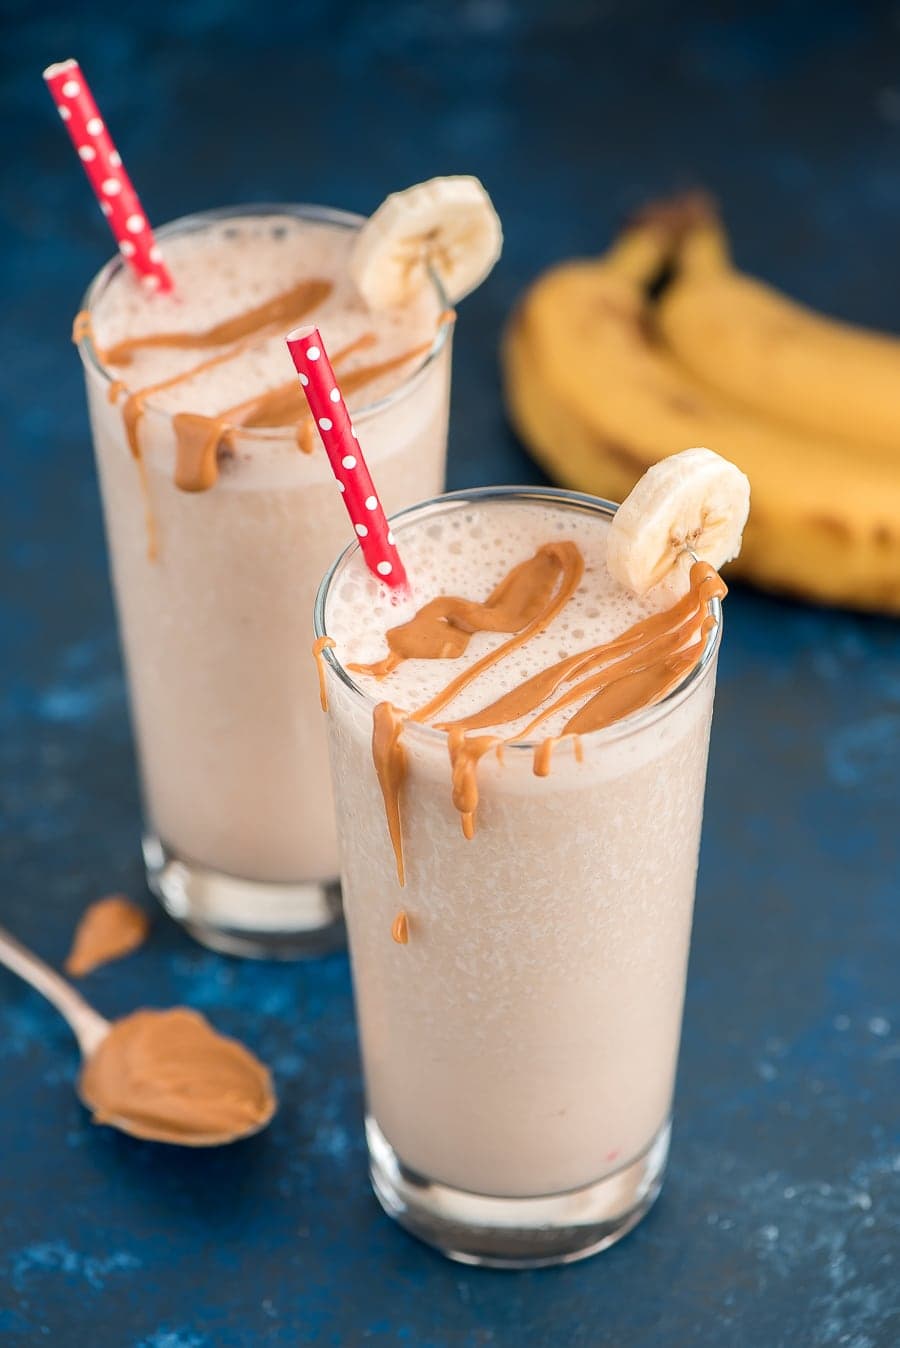 Peanut Butter Banana Smoothie Recipe in two glasses with straws